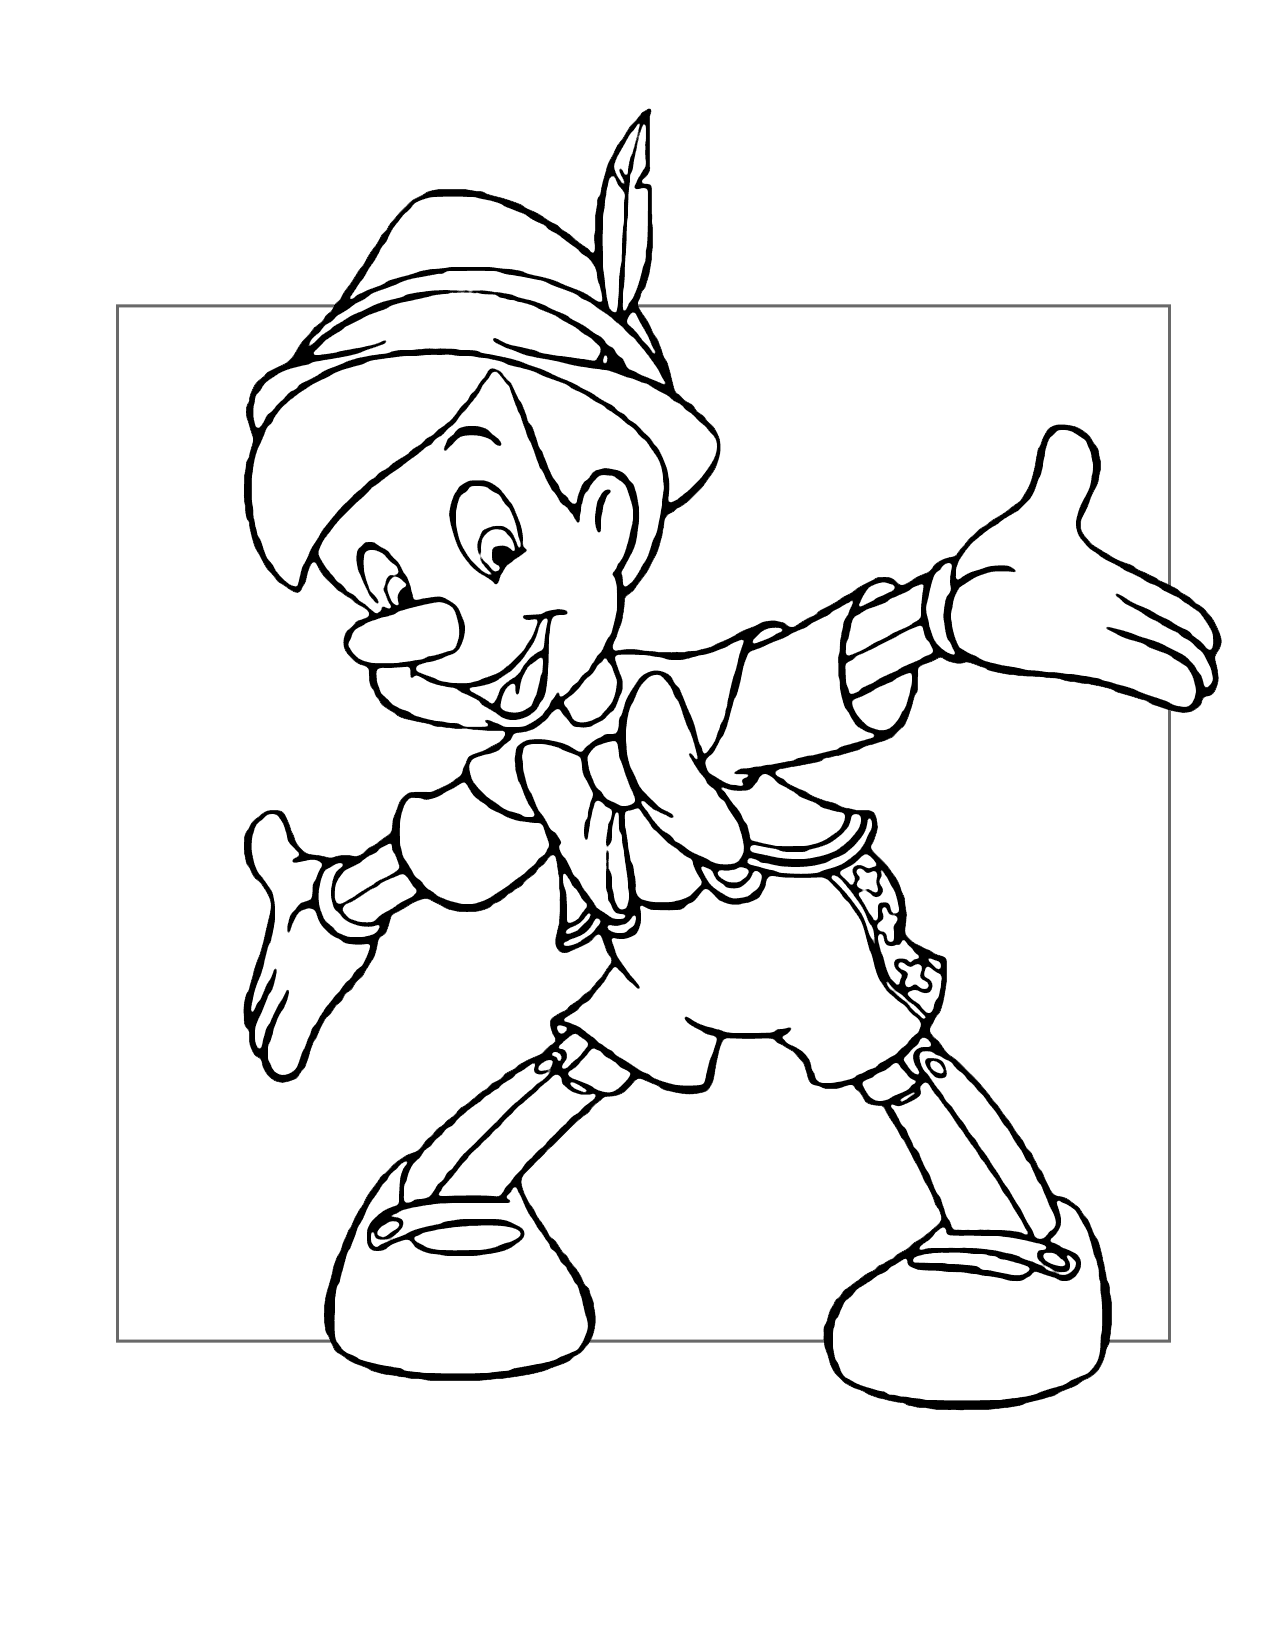 Pinocchio Coloring Page